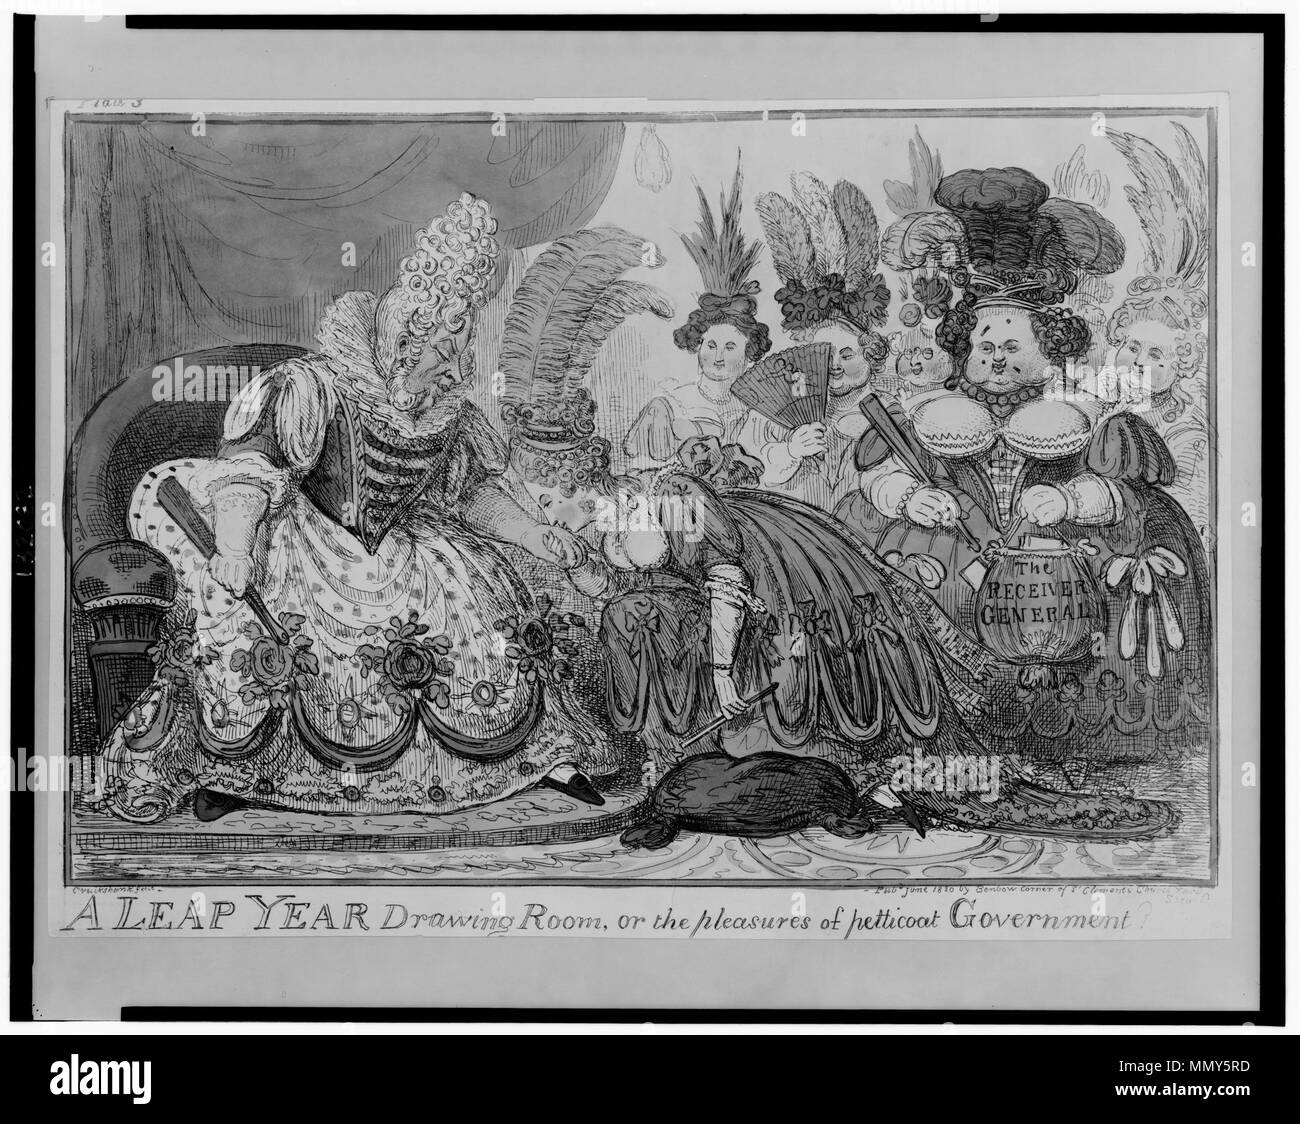 . English: Title: A leap year drawing room, or the pleasures of petticoat government Abstract: Print showing George IV dressed as a woman sitting in a parlor greeting his female guests, one guest kneeling on a cushion and kissing his hand may be Lady Conyngham. Physical description: 1 print : etching, hand-colored ; 27.6 x 39 cm. (sheet) Notes: Cruikshank fecit.; Forms part of: British Cartoon Prints Collection (Library of Congress).; Title from item.  . before 1820.   Isaac Robert Cruikshank  (1789–1856)     Alternative names Robert Cruikshank  Description British caricaturist and illustrator Stock Photo